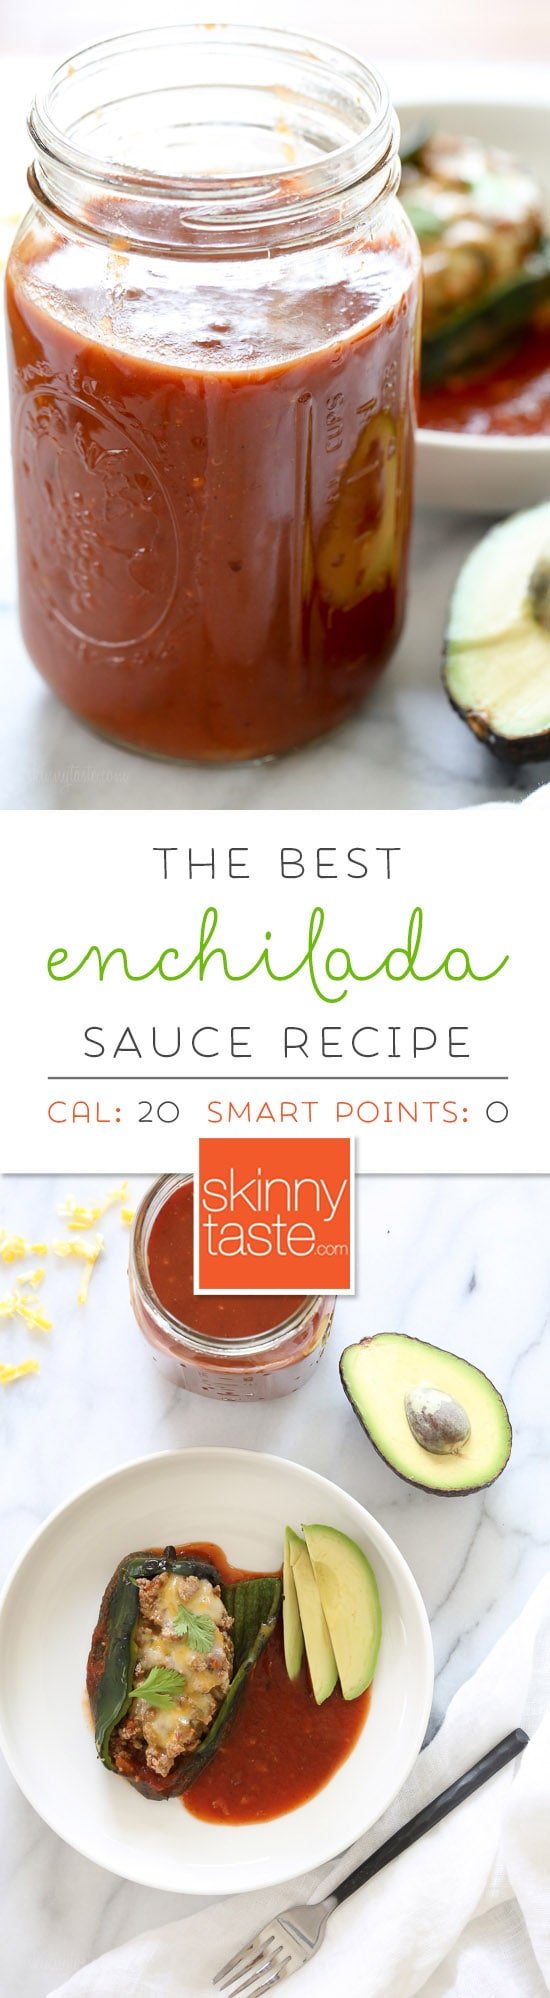 This is hands down, The Best Enchilada Sauce Recipe ever. Once you try this, you'll never buy canned again! If you love enchiladas as much as I do, then making homemade enchilada sauce from scratch is a must.